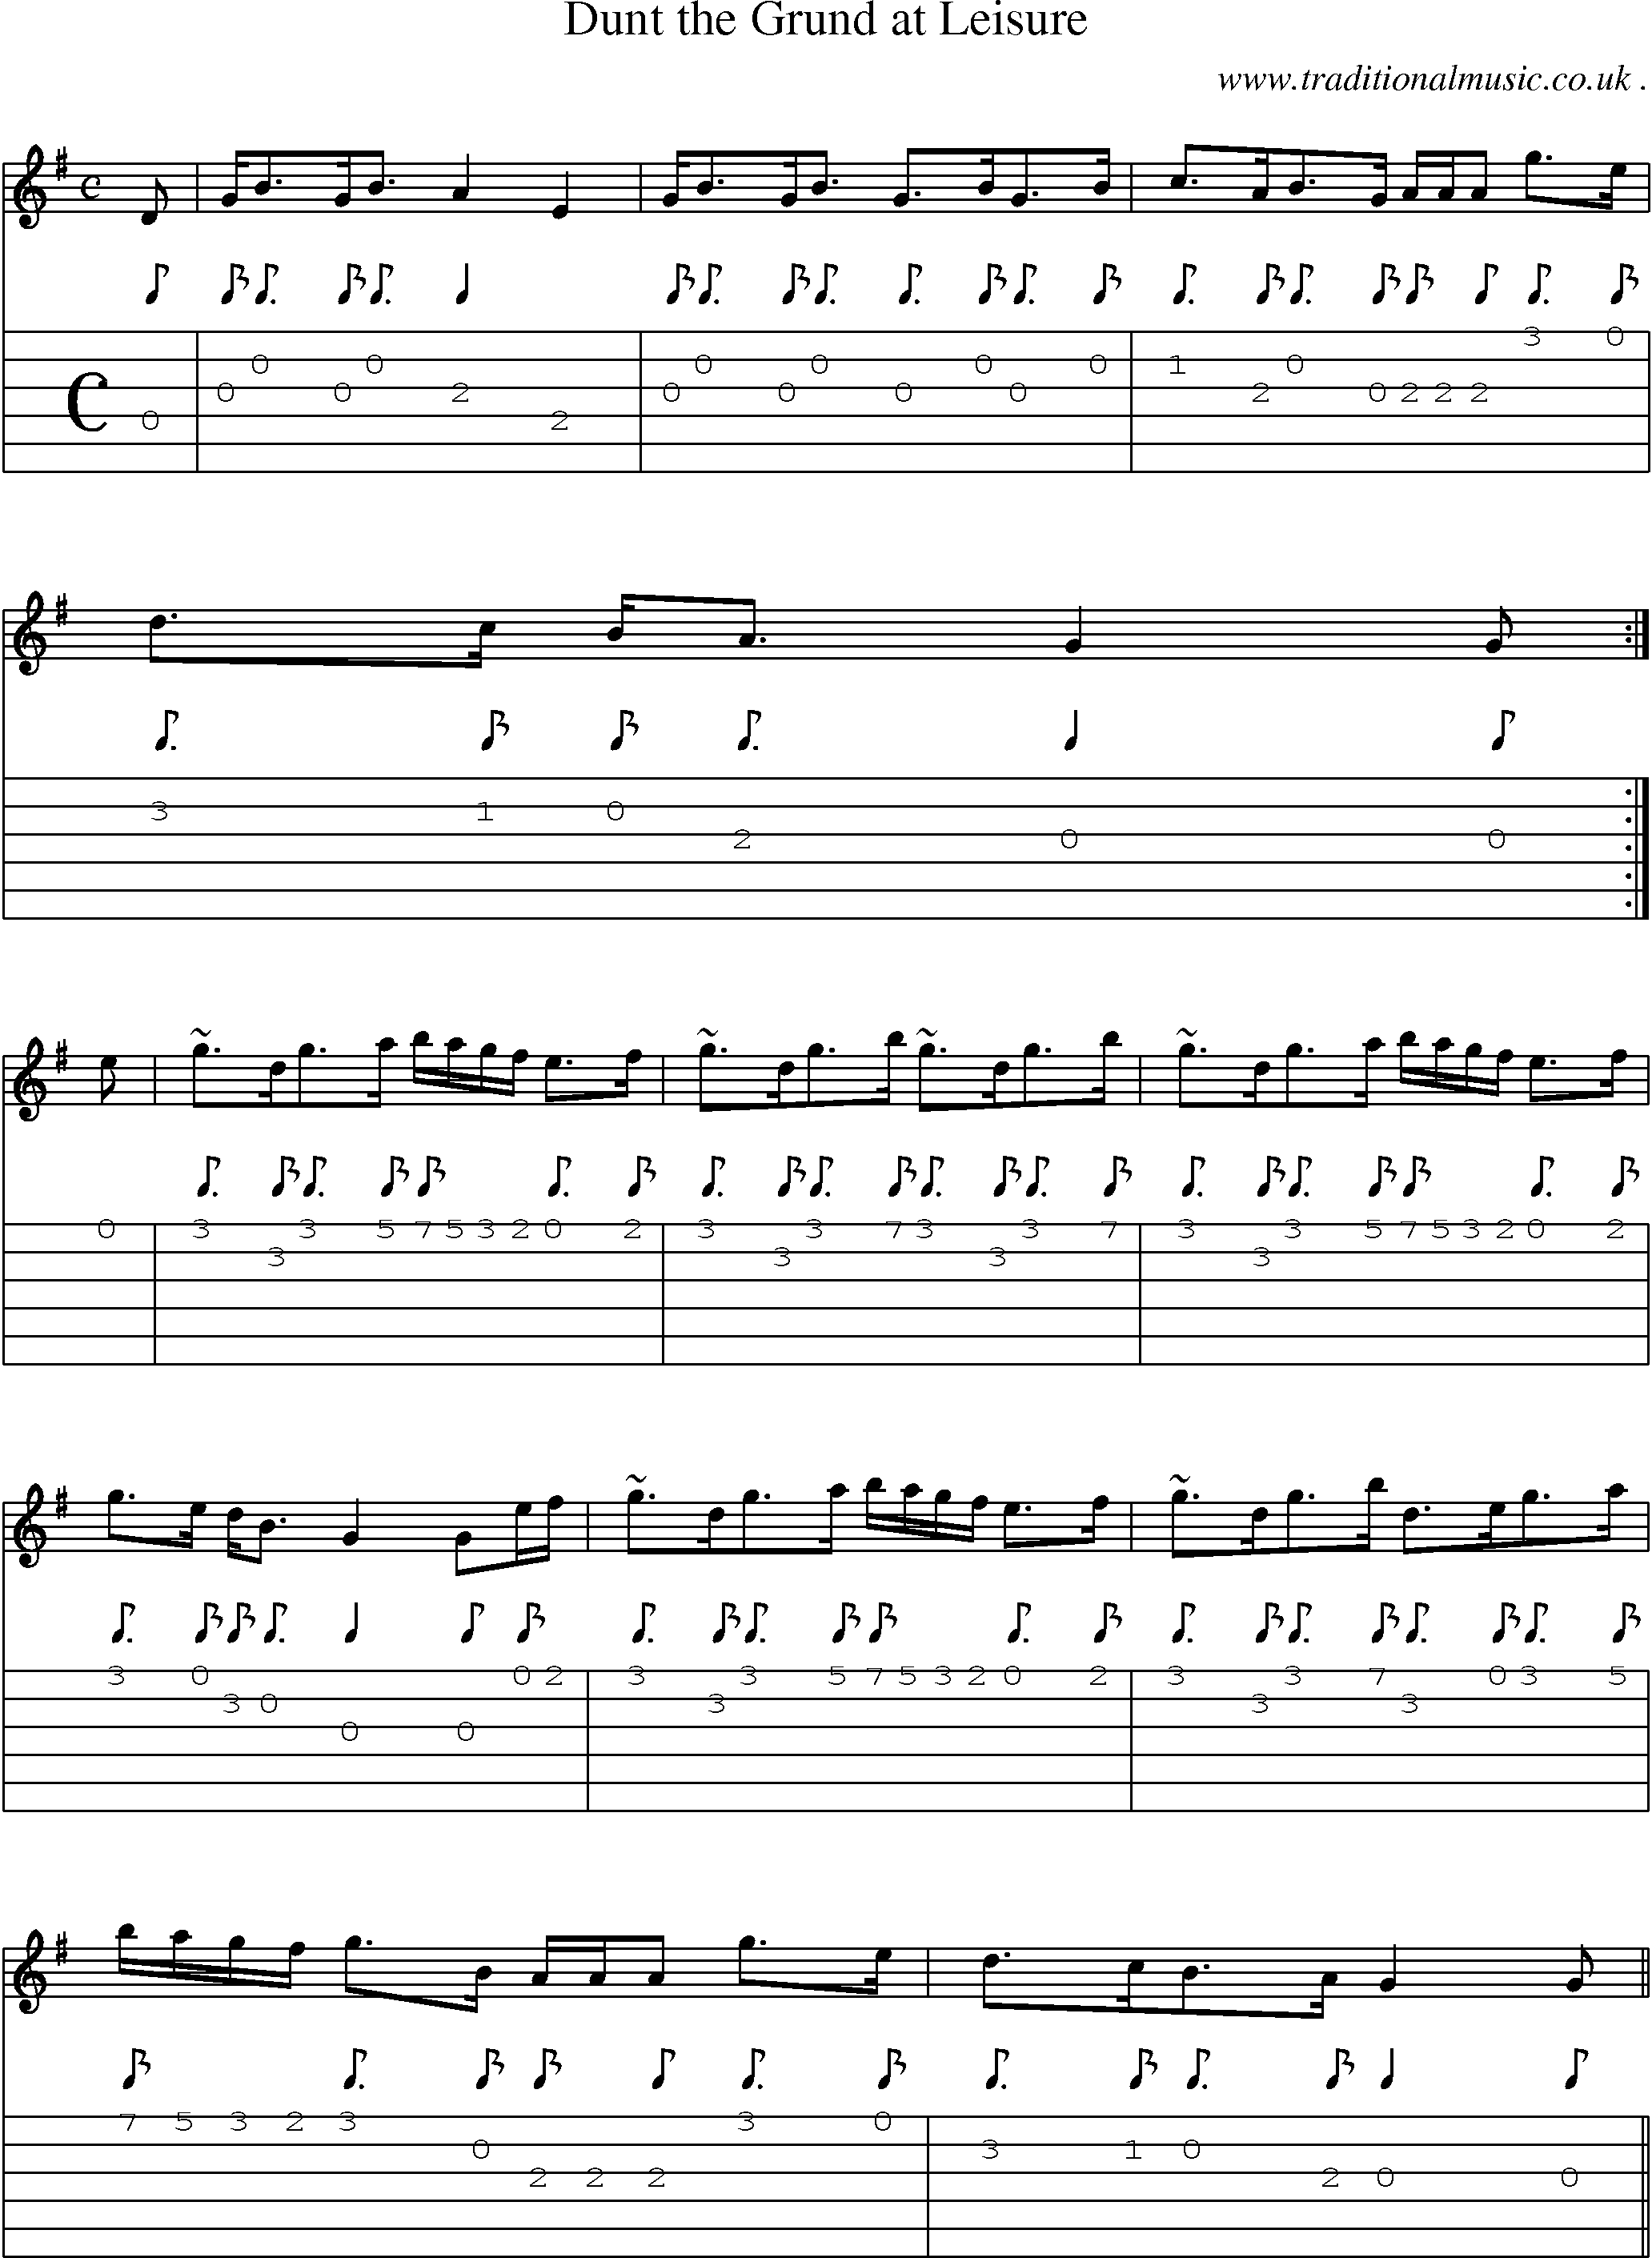 Sheet-music  score, Chords and Guitar Tabs for Dunt The Grund At Leisure